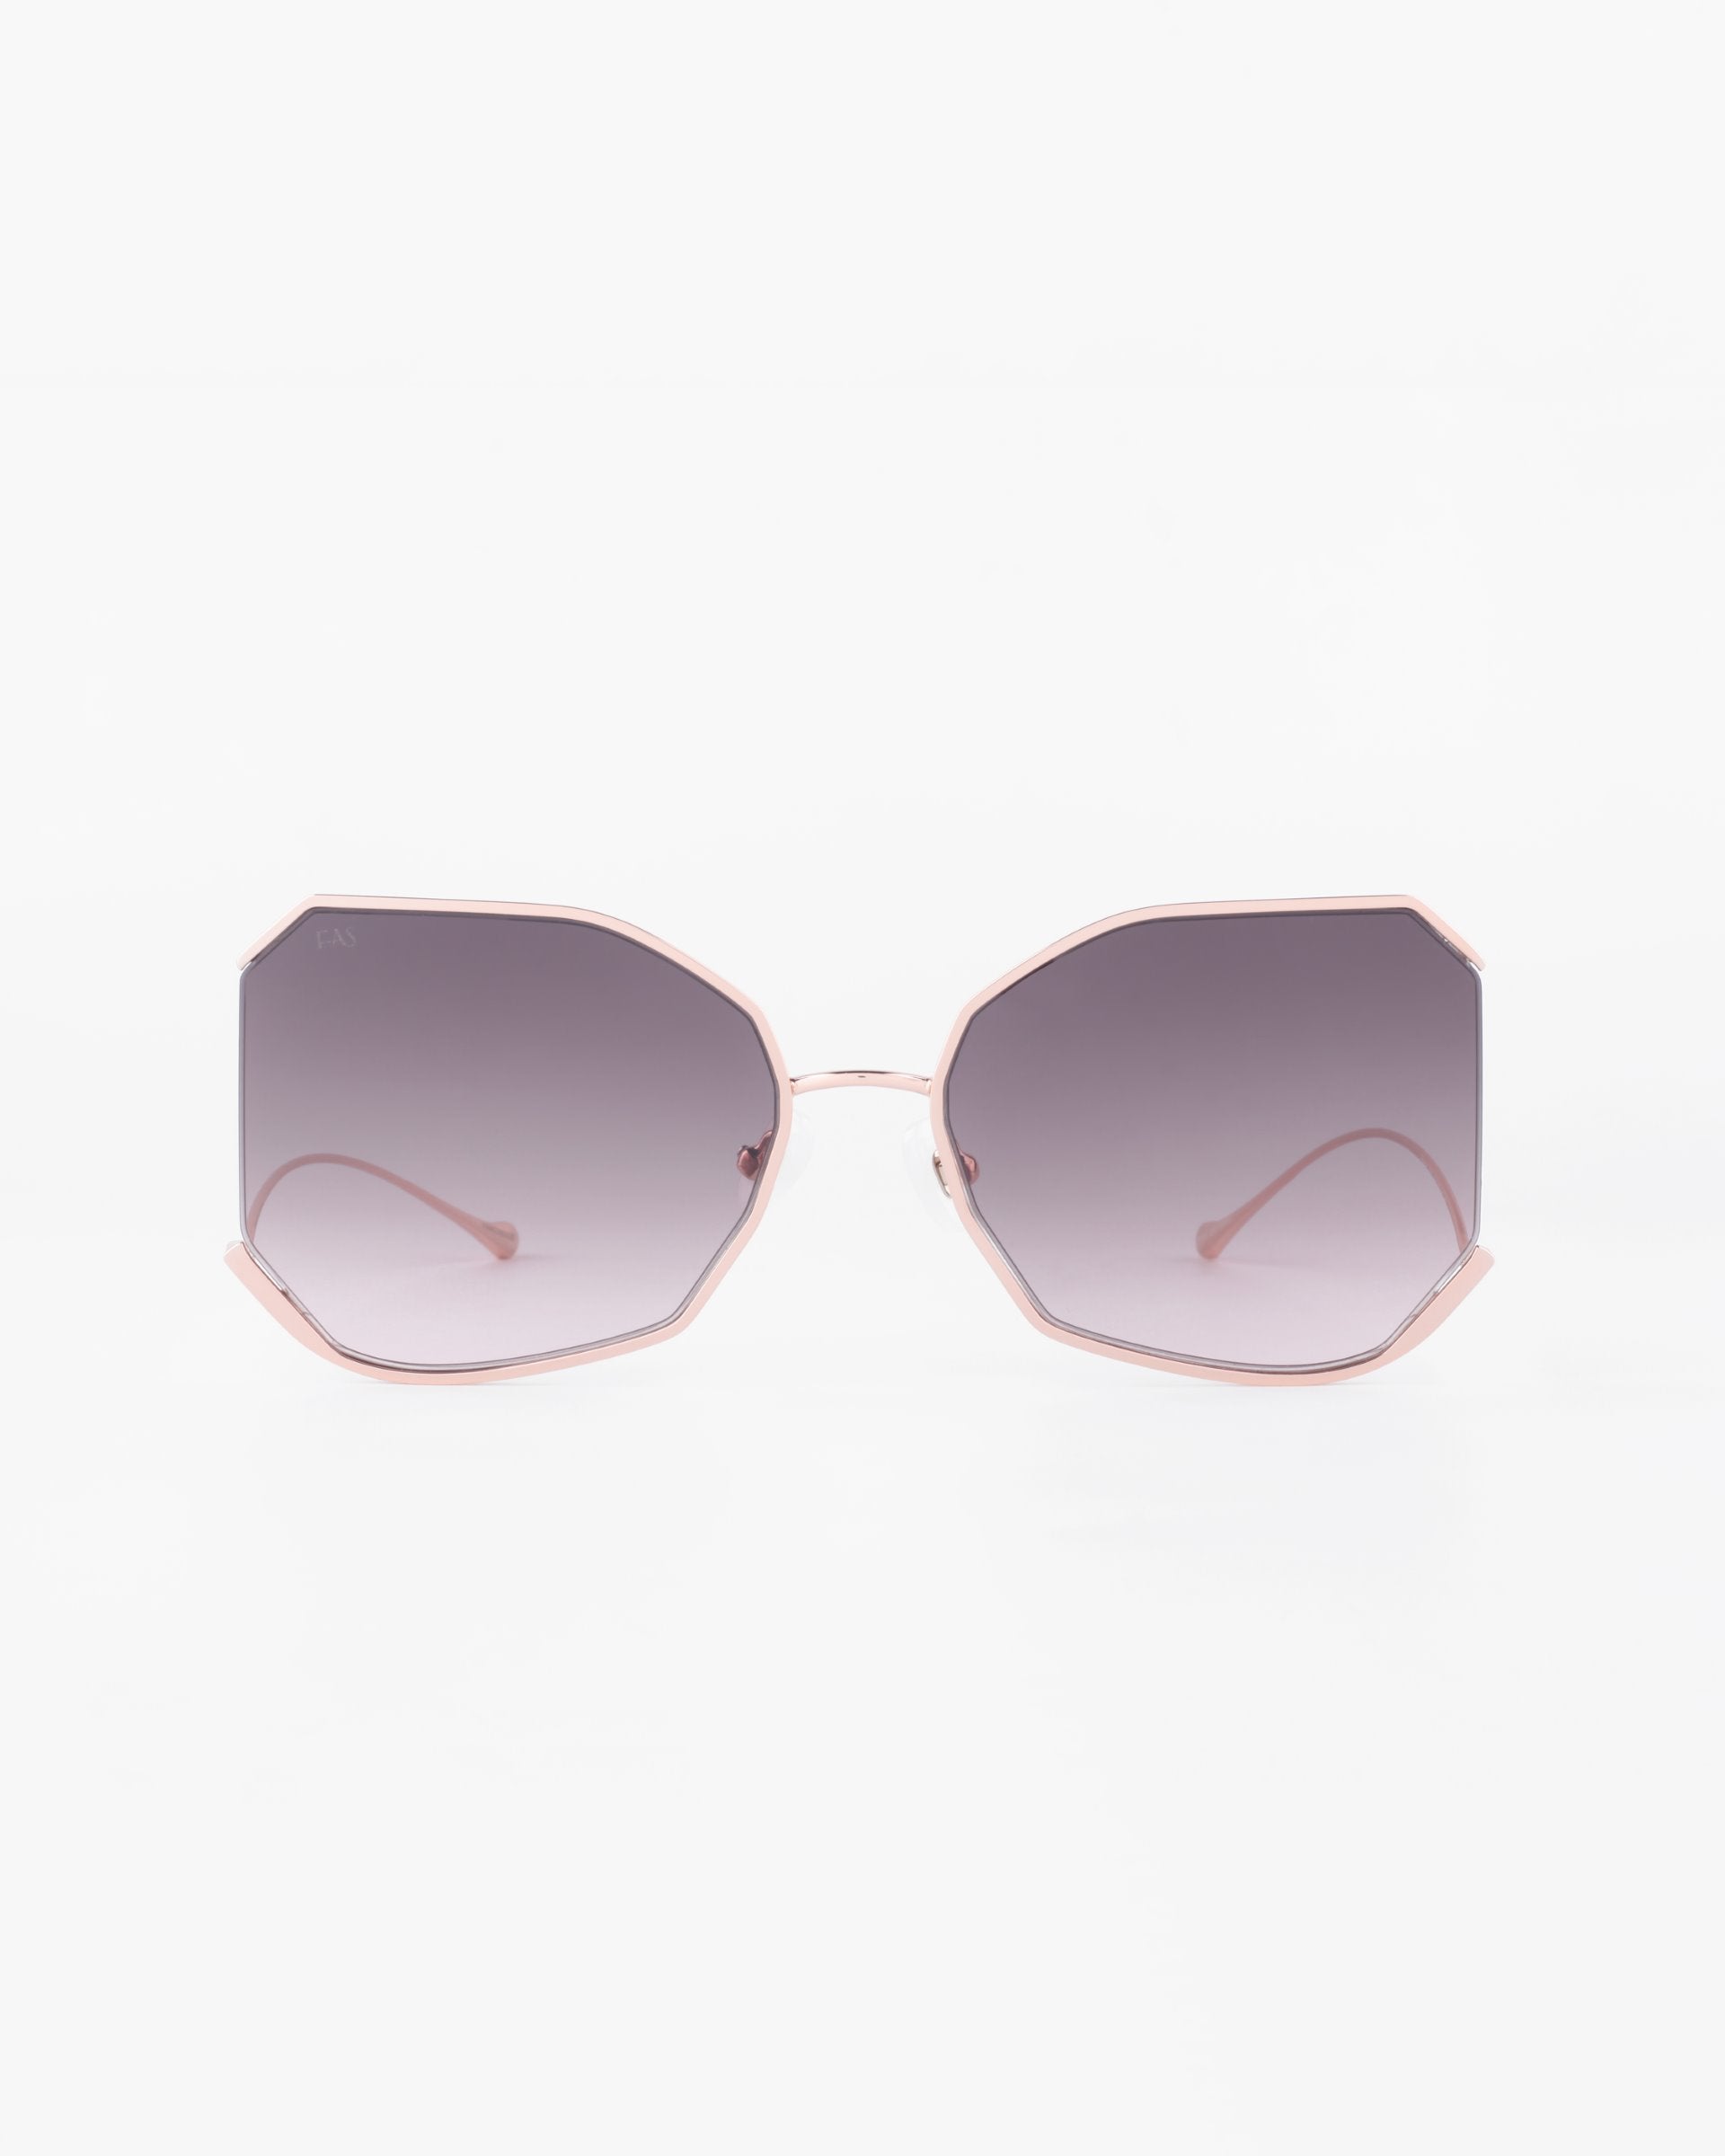 A pair of stylish For Art's Sake® Painter sunglasses with large, octagonal lenses that are tinted in a gradient from dark to light. Crafted with ultra-lightweight nylon lenses offering 100% UVA & UVB protection, the thin gold-plated stainless steel frame and temples are a soft pink color, enhancing the contemporary and chic aesthetic. The background is plain white.